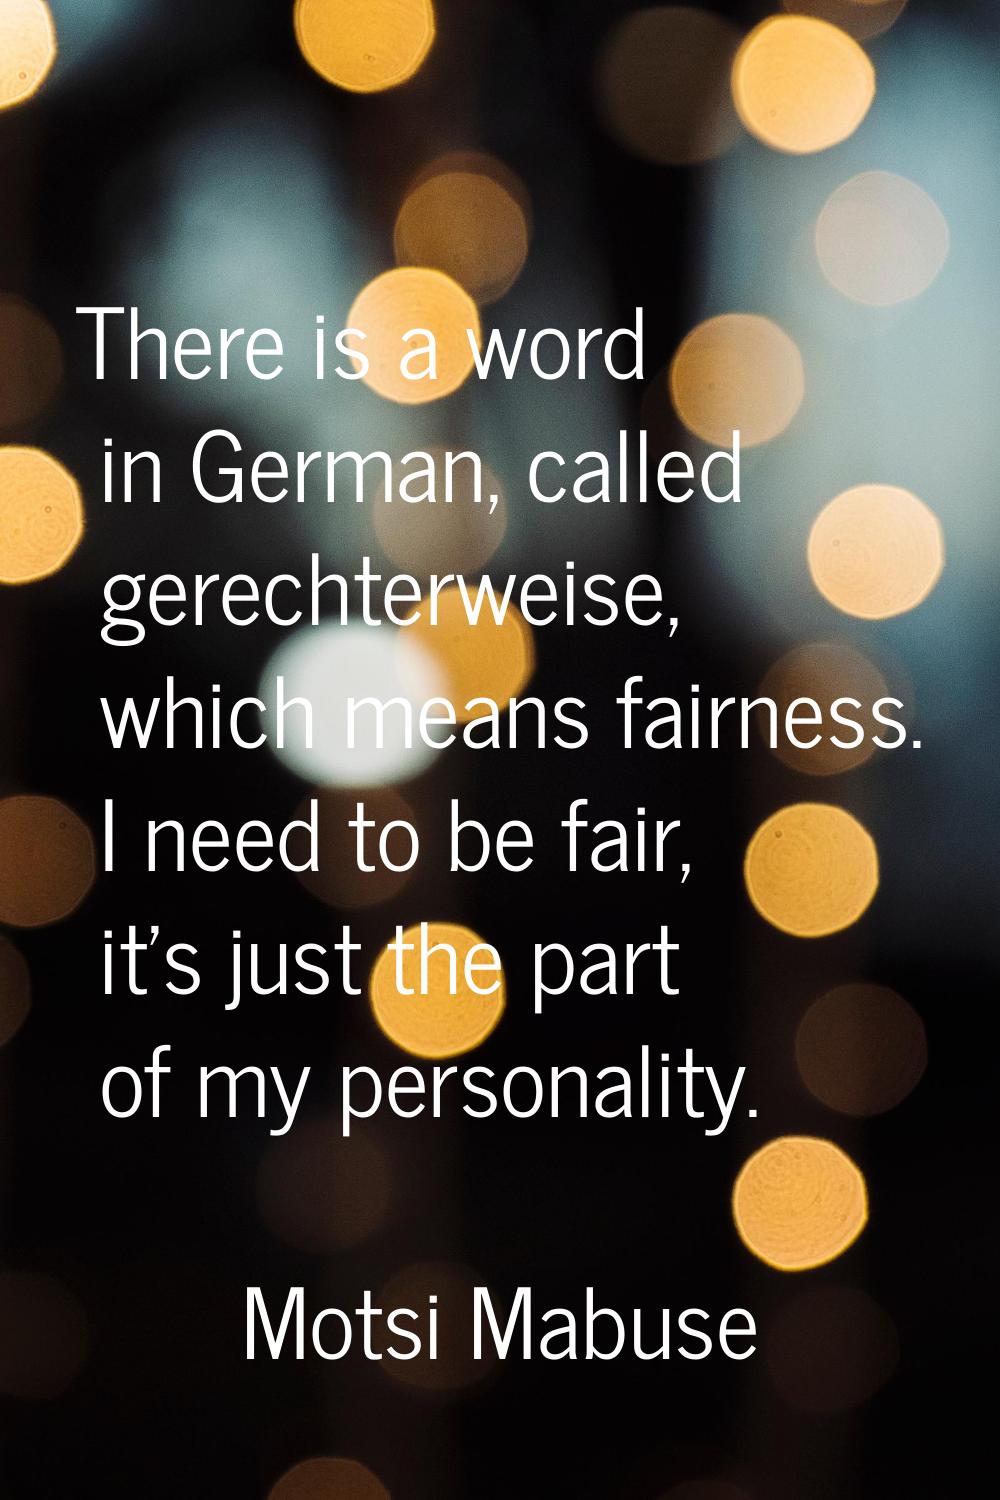 There is a word in German, called gerechterweise, which means fairness. I need to be fair, it's jus